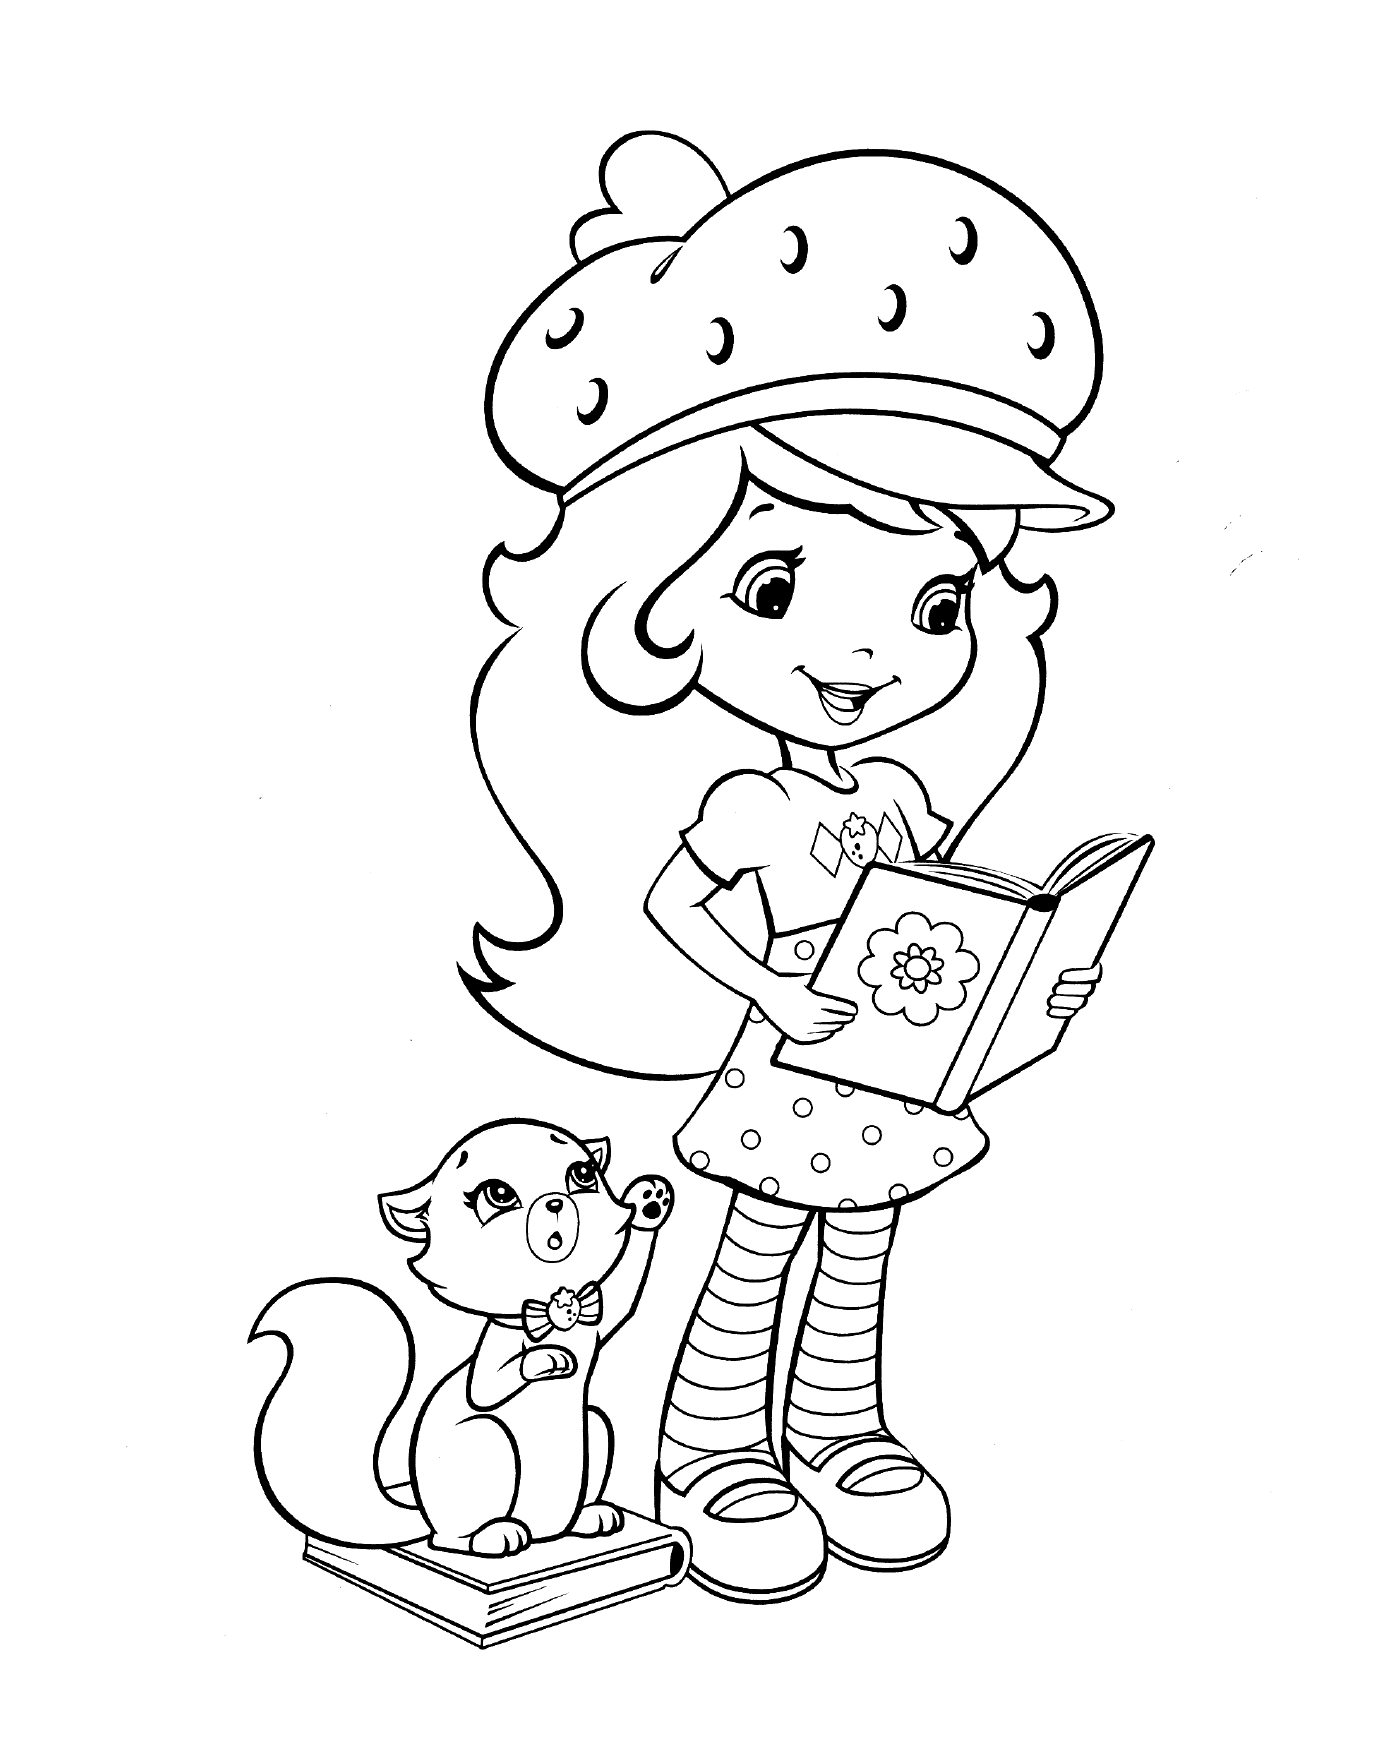  Strainette likes to read to her cat 